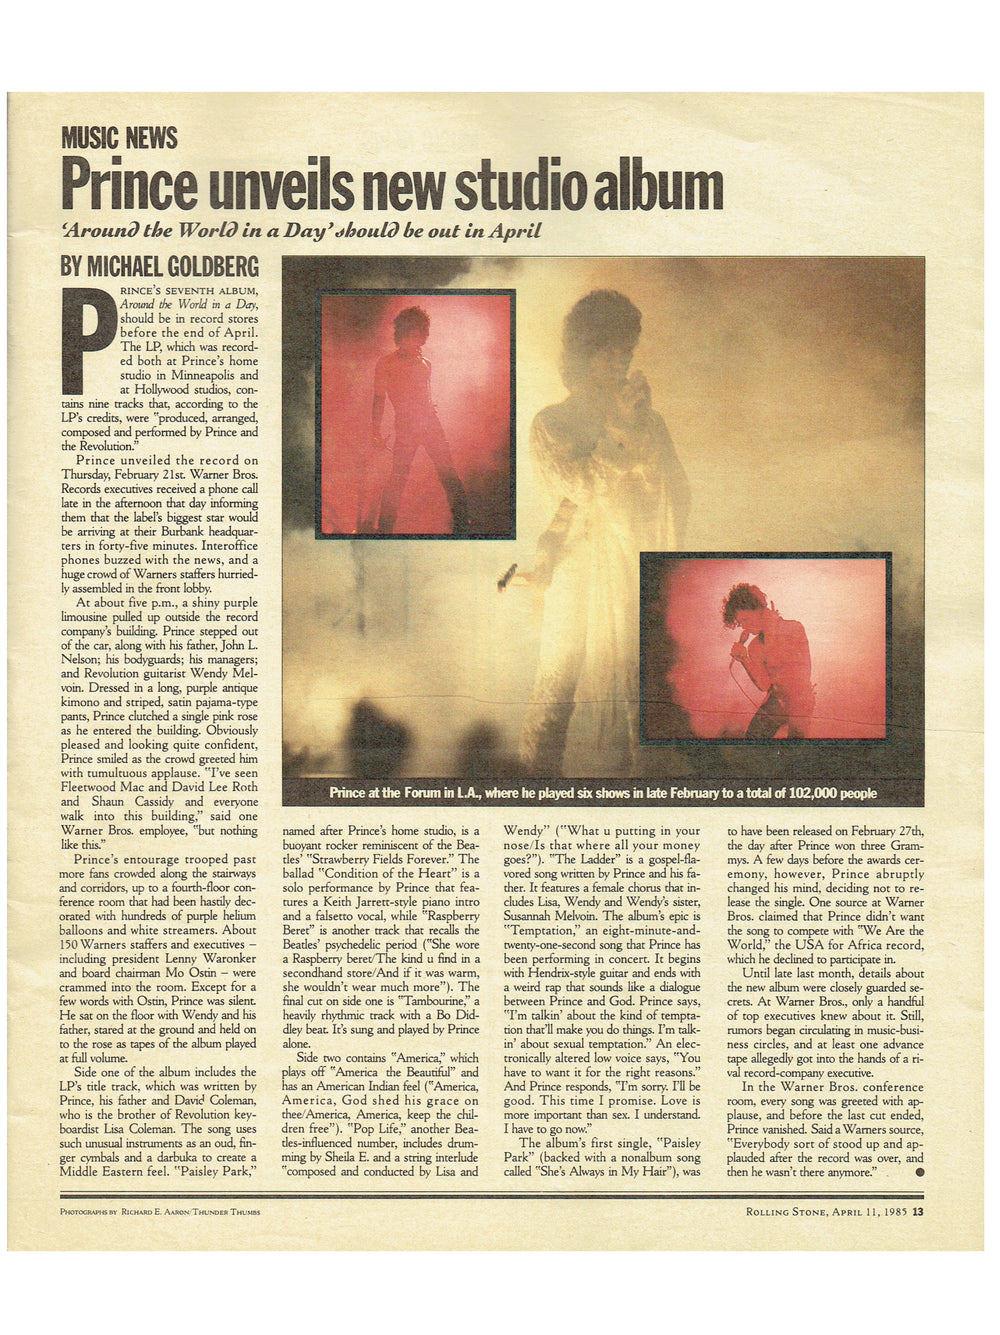 Rolling Stone Magazine April 11th 1985 Prince 1 Page Article New Album